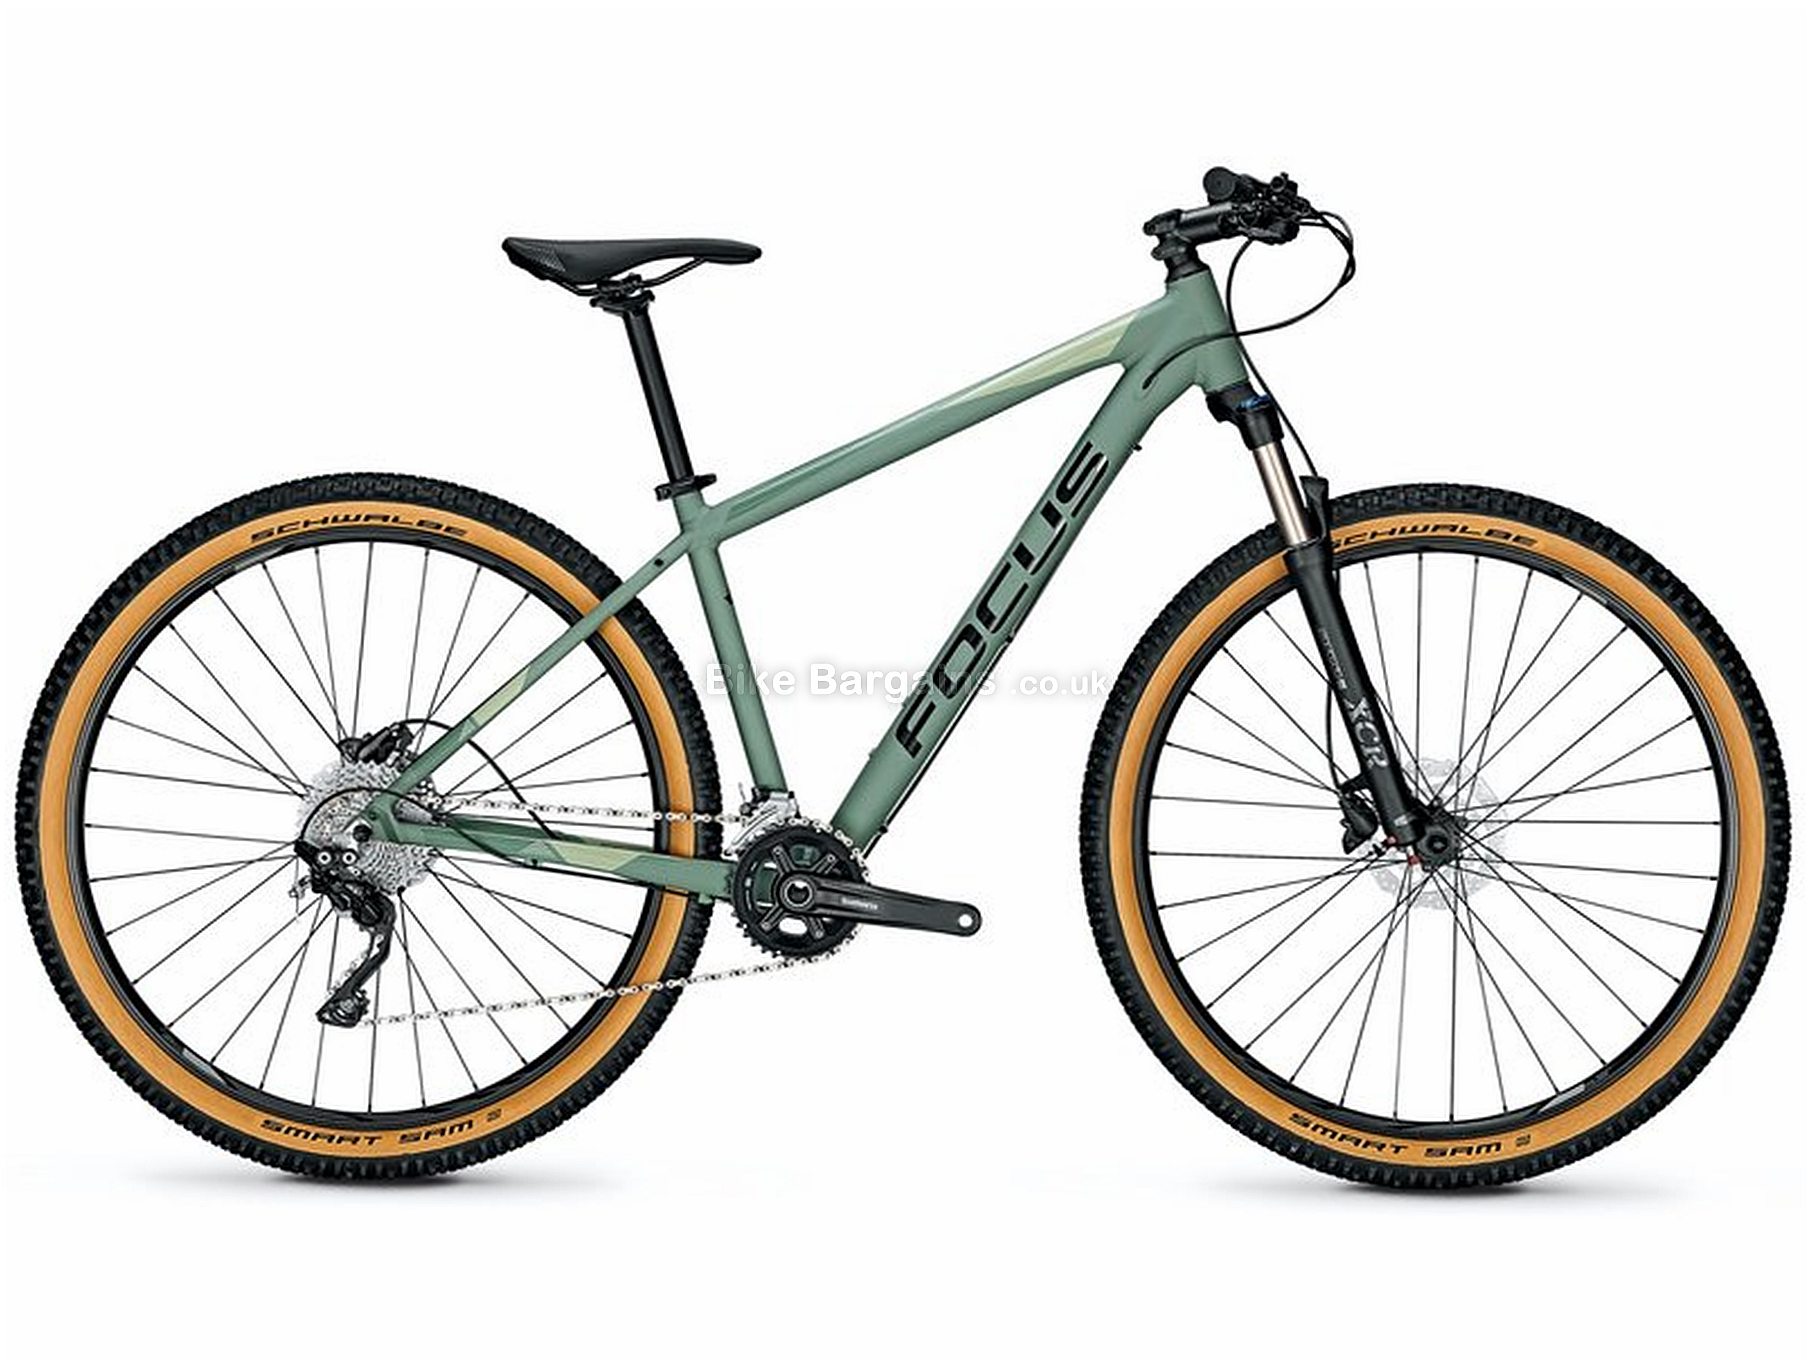 Focus Whistler 3.8 Mountain Bike 2020 was sold for £640